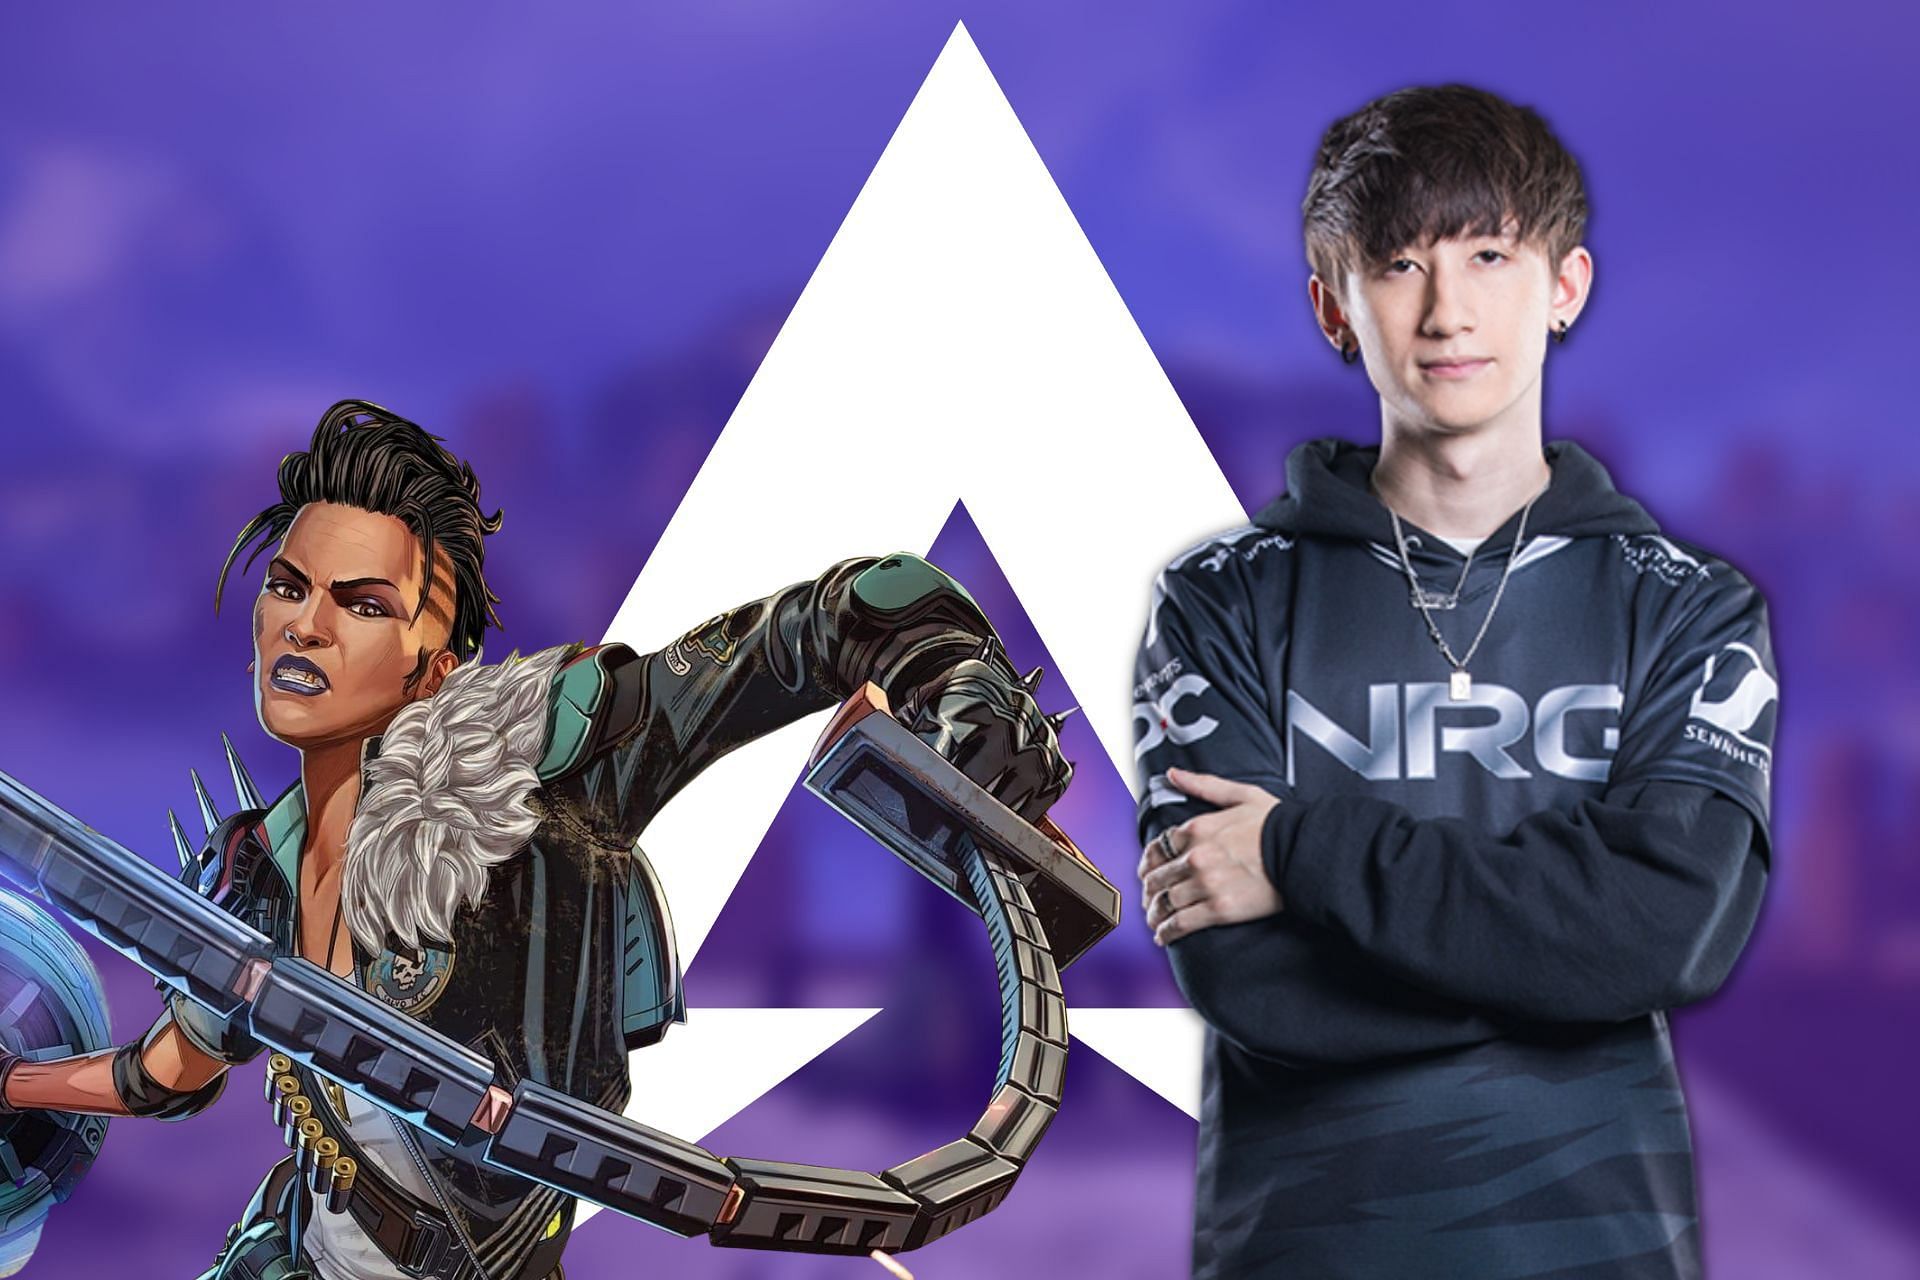 Aceu is one of the best Apex Legends players in the world (Image via Sportskeeda)